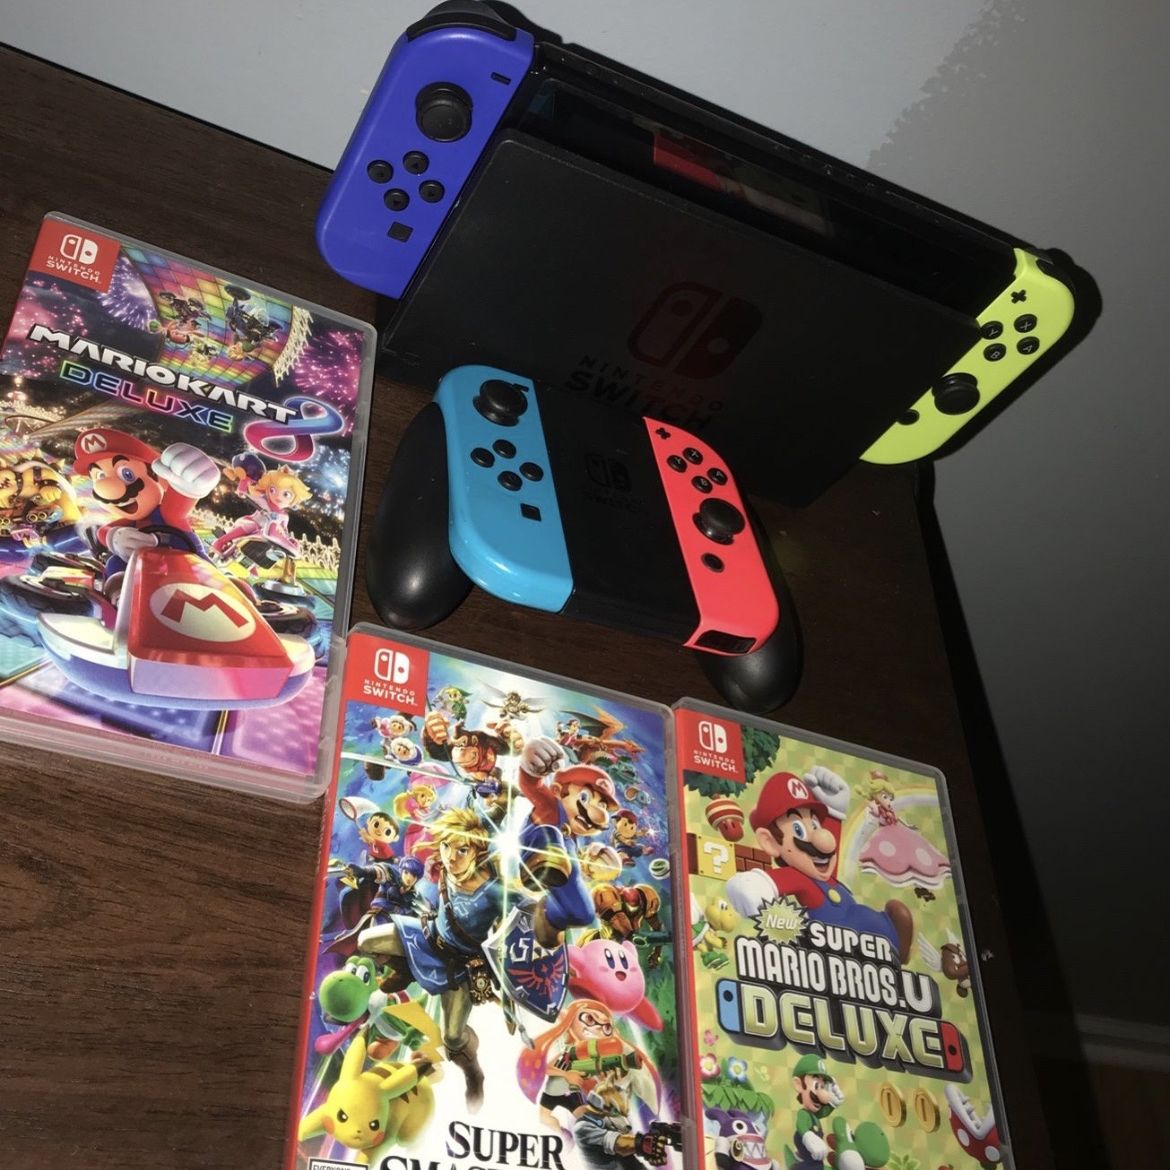 NINTENDO SWITCH COMES WITH 4 GAMES AND 4 CONTROLLERS